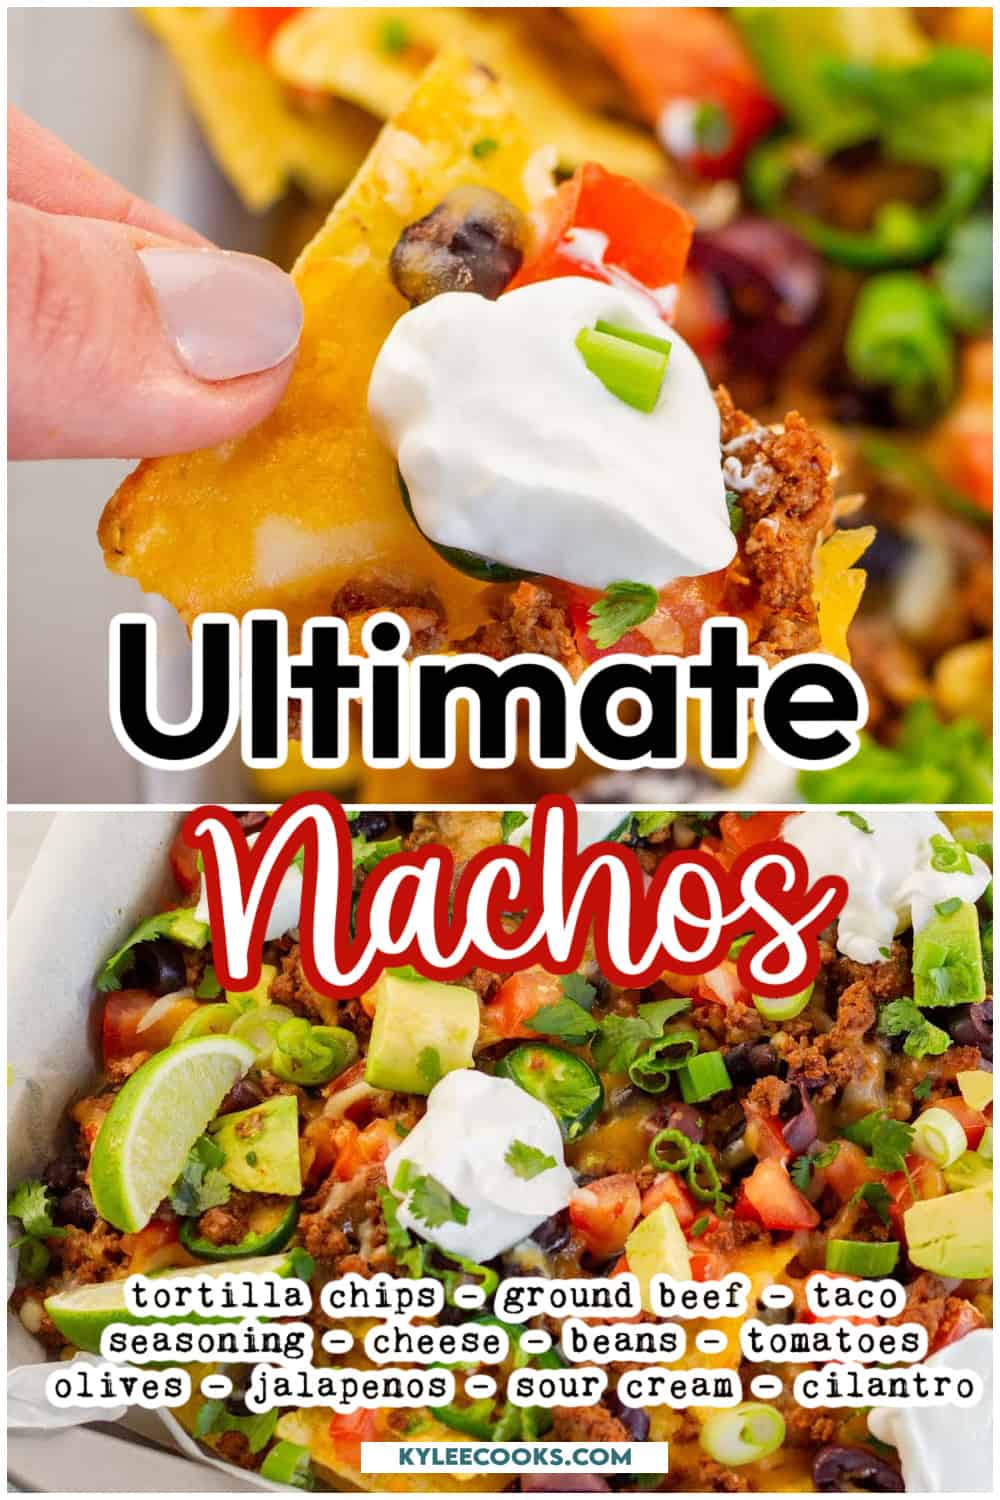 a hand with a nacho on it, recipe name and ingredients overlaid in text.